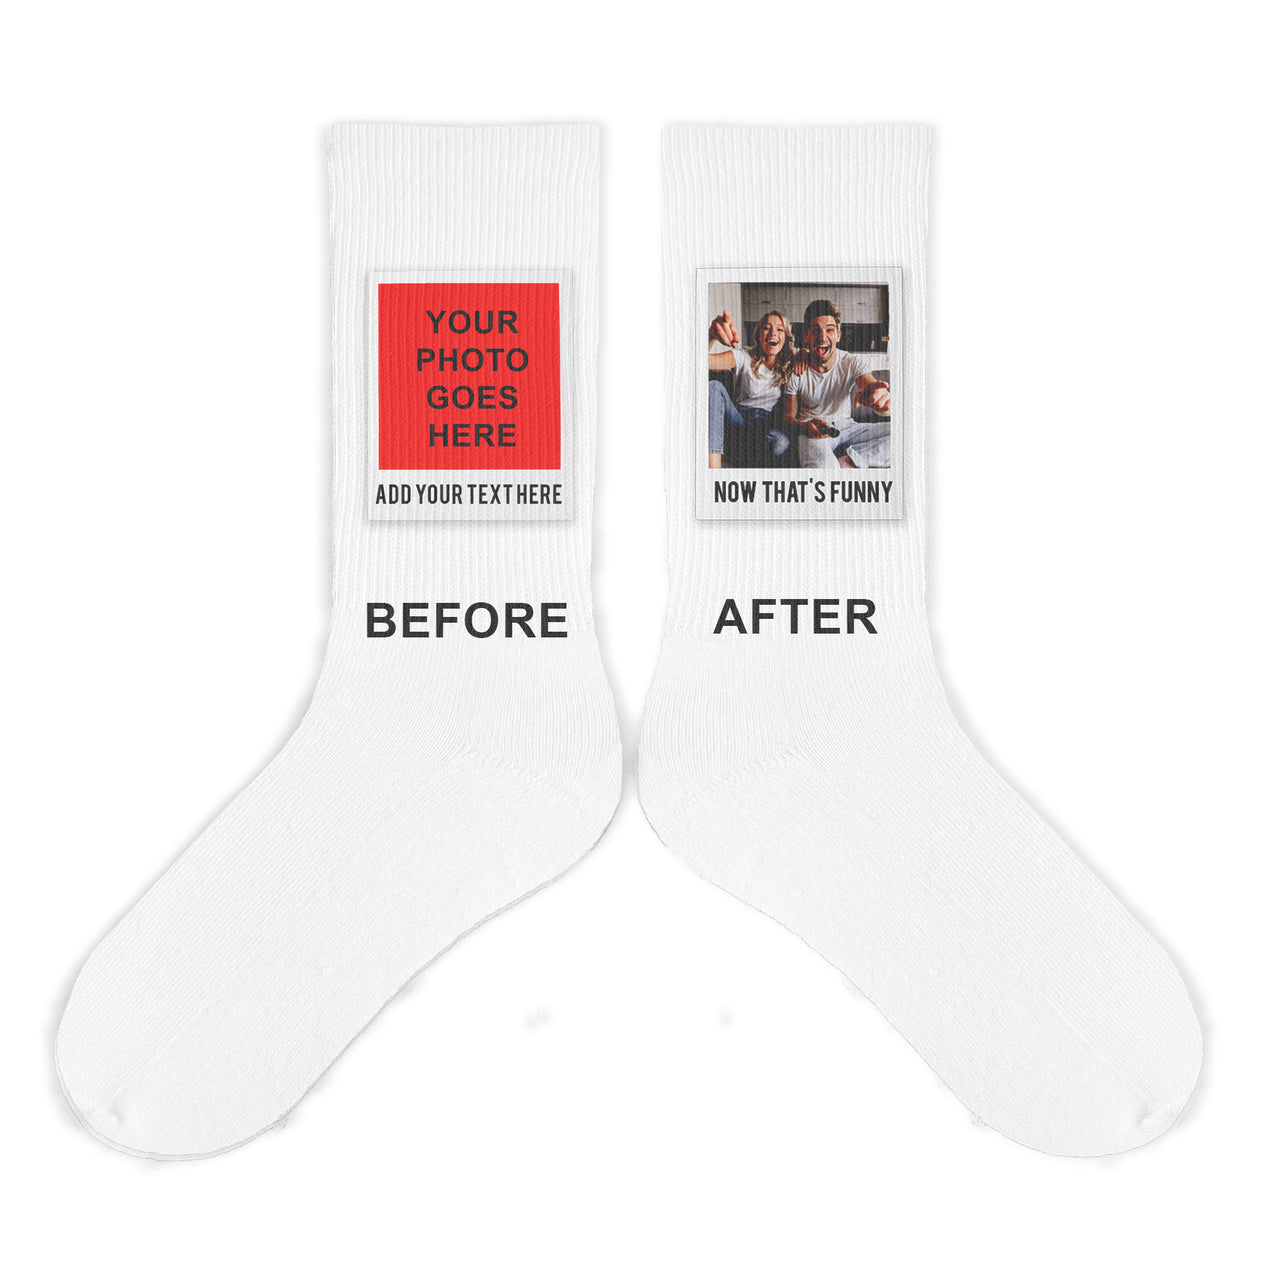 Funny Cotton Footie Socks Printed with Men's Feet in Grass